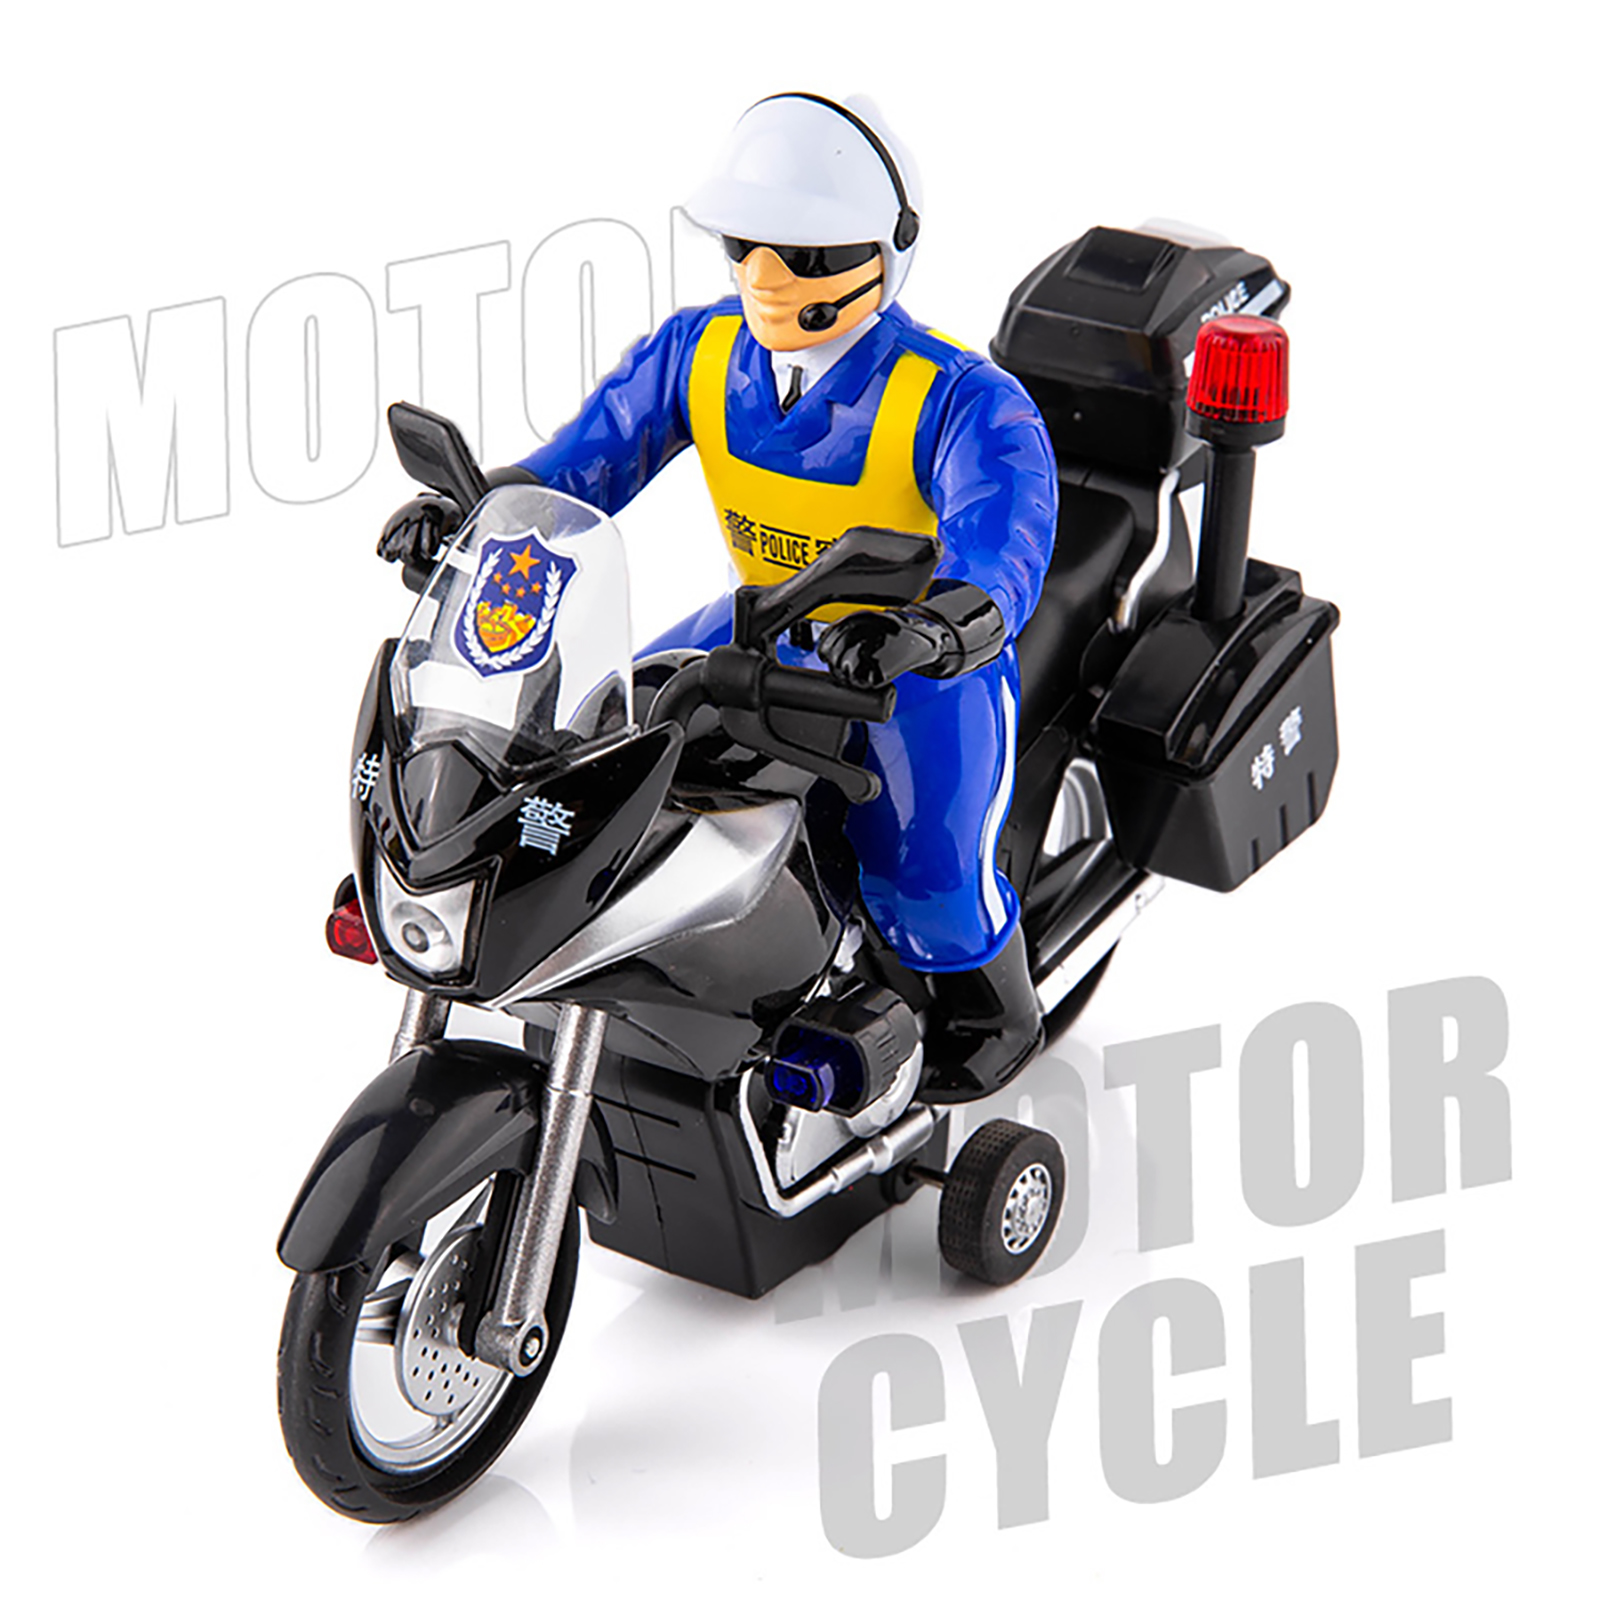 1:14 Alloy Motorcycle Model Simulation Pull-back Diecast Motorcycle With Figure Doll For Boys Birthday Christmas Gifts Home Decor VB32513